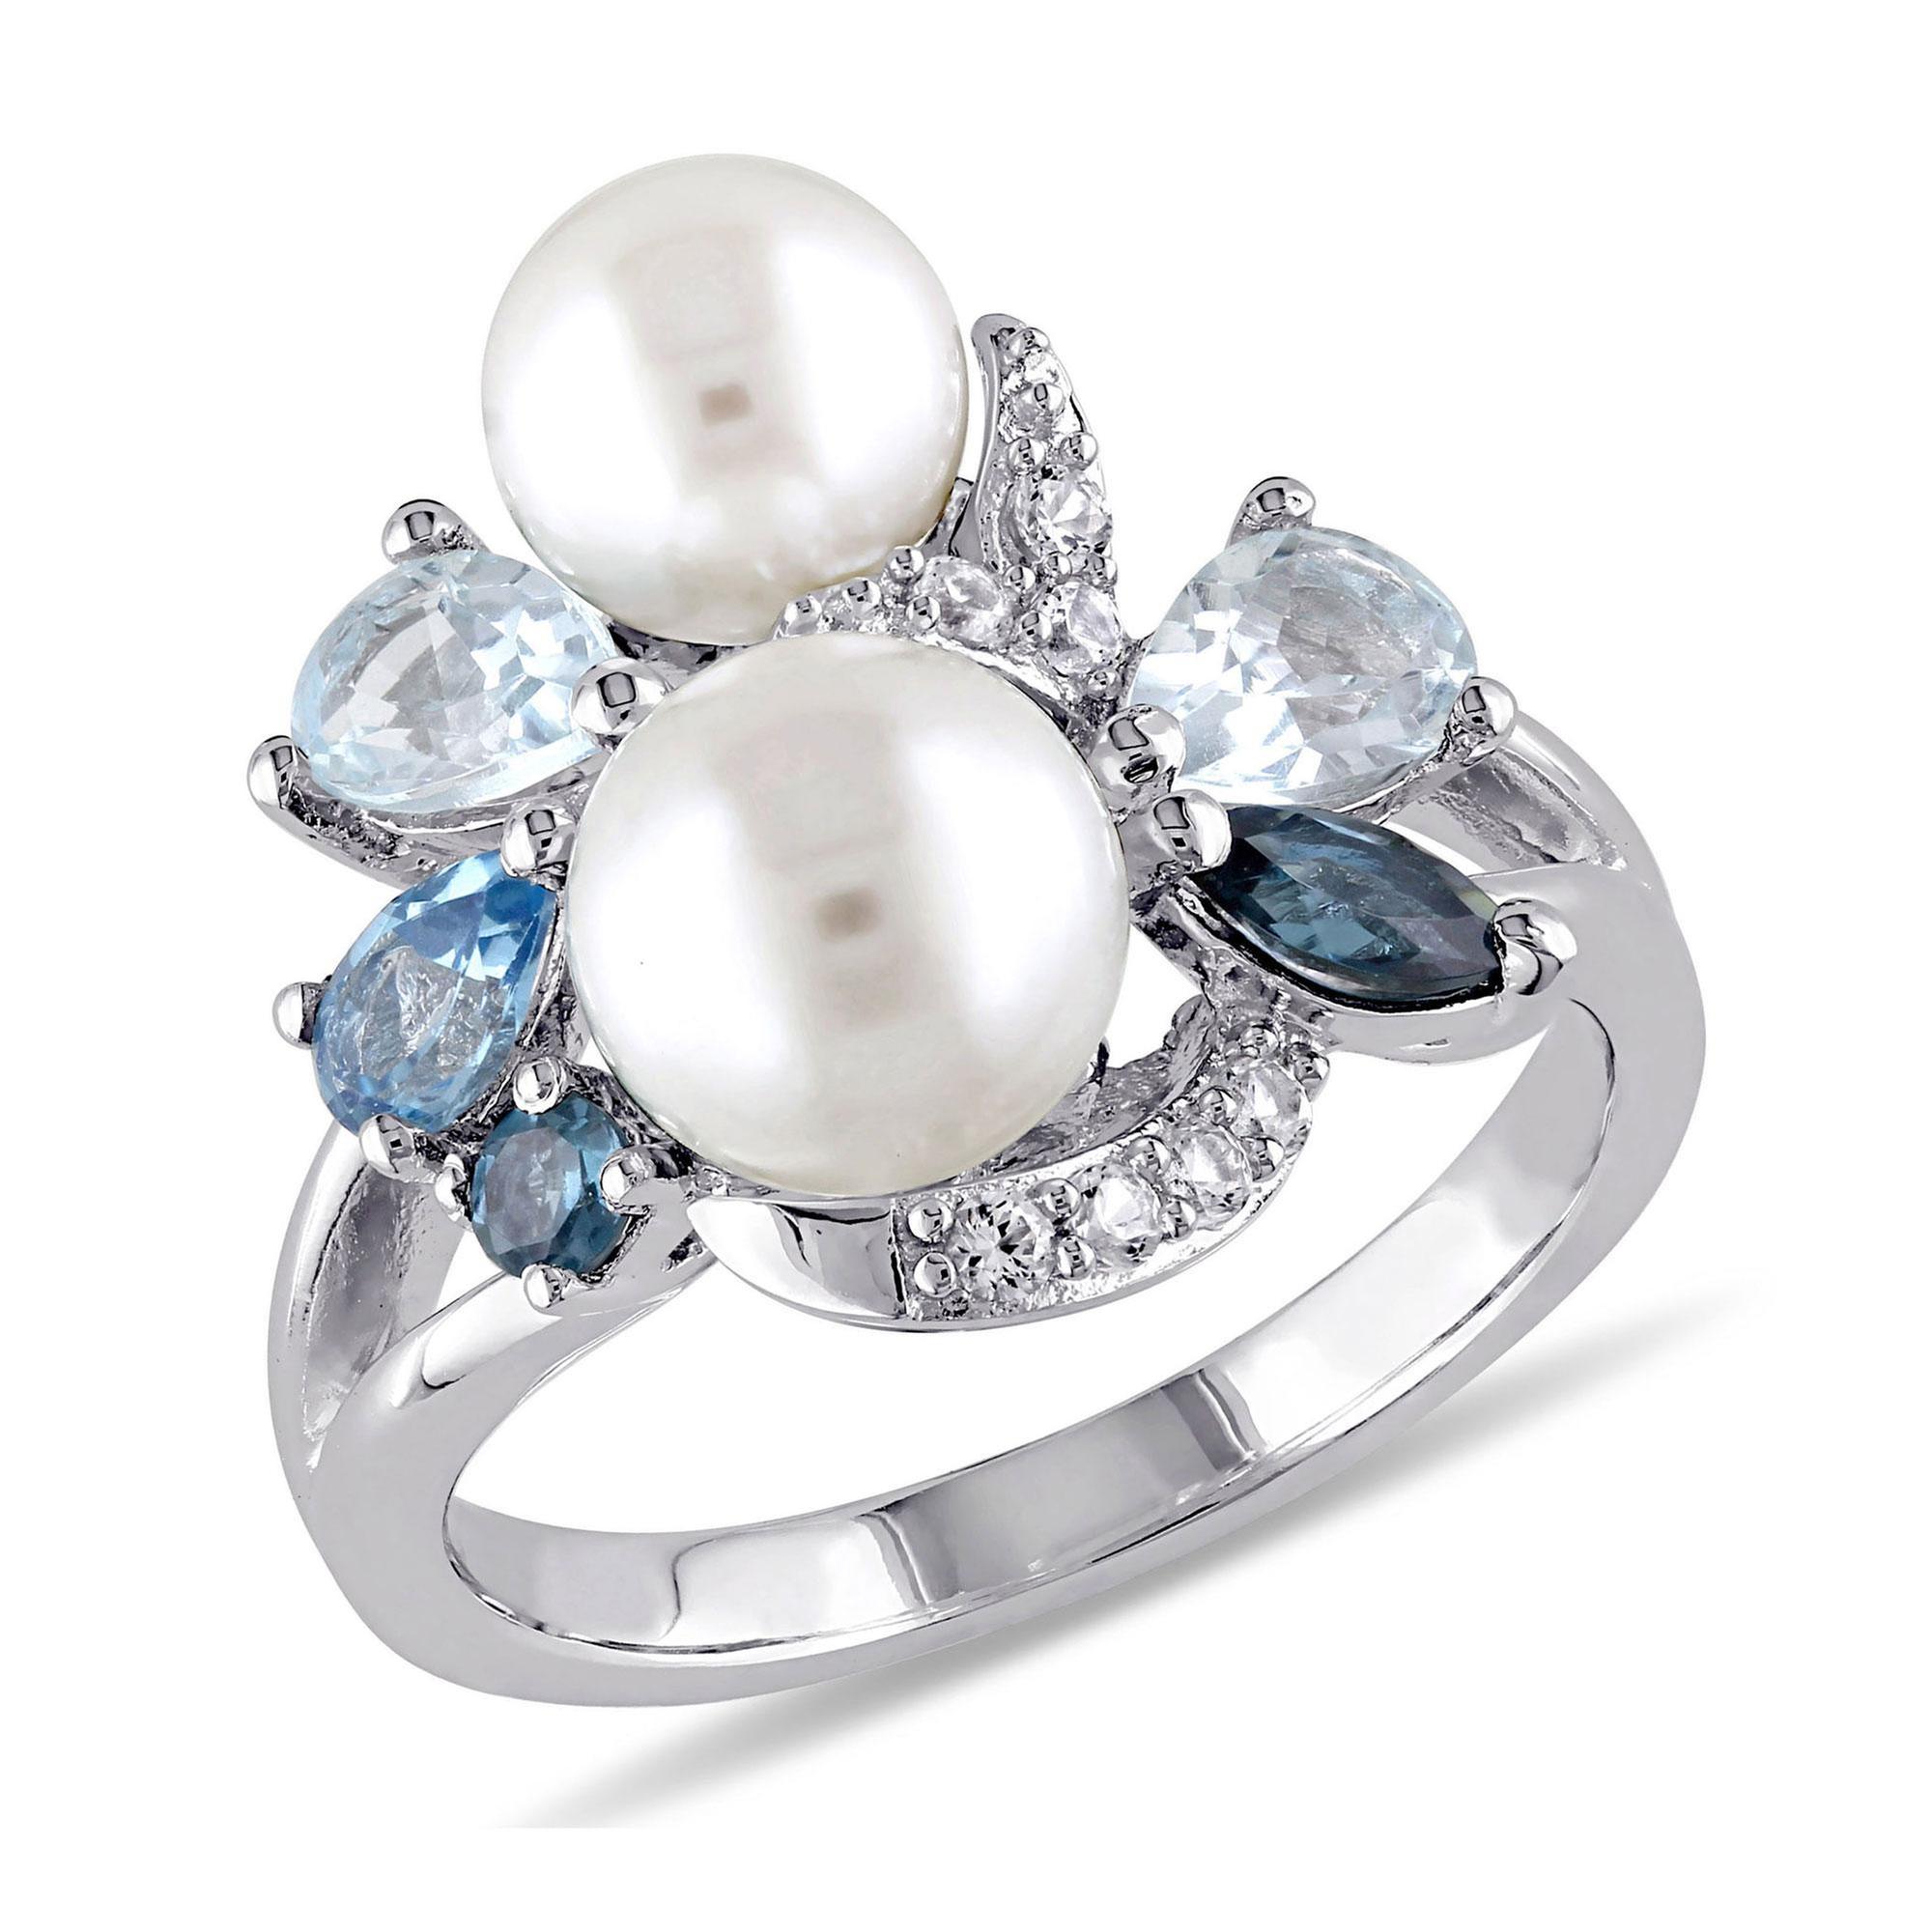 Blue Mixed Gemstone and White Freshwater Cultured Pearl Cluster Ring in Sterling Silver- Size 9